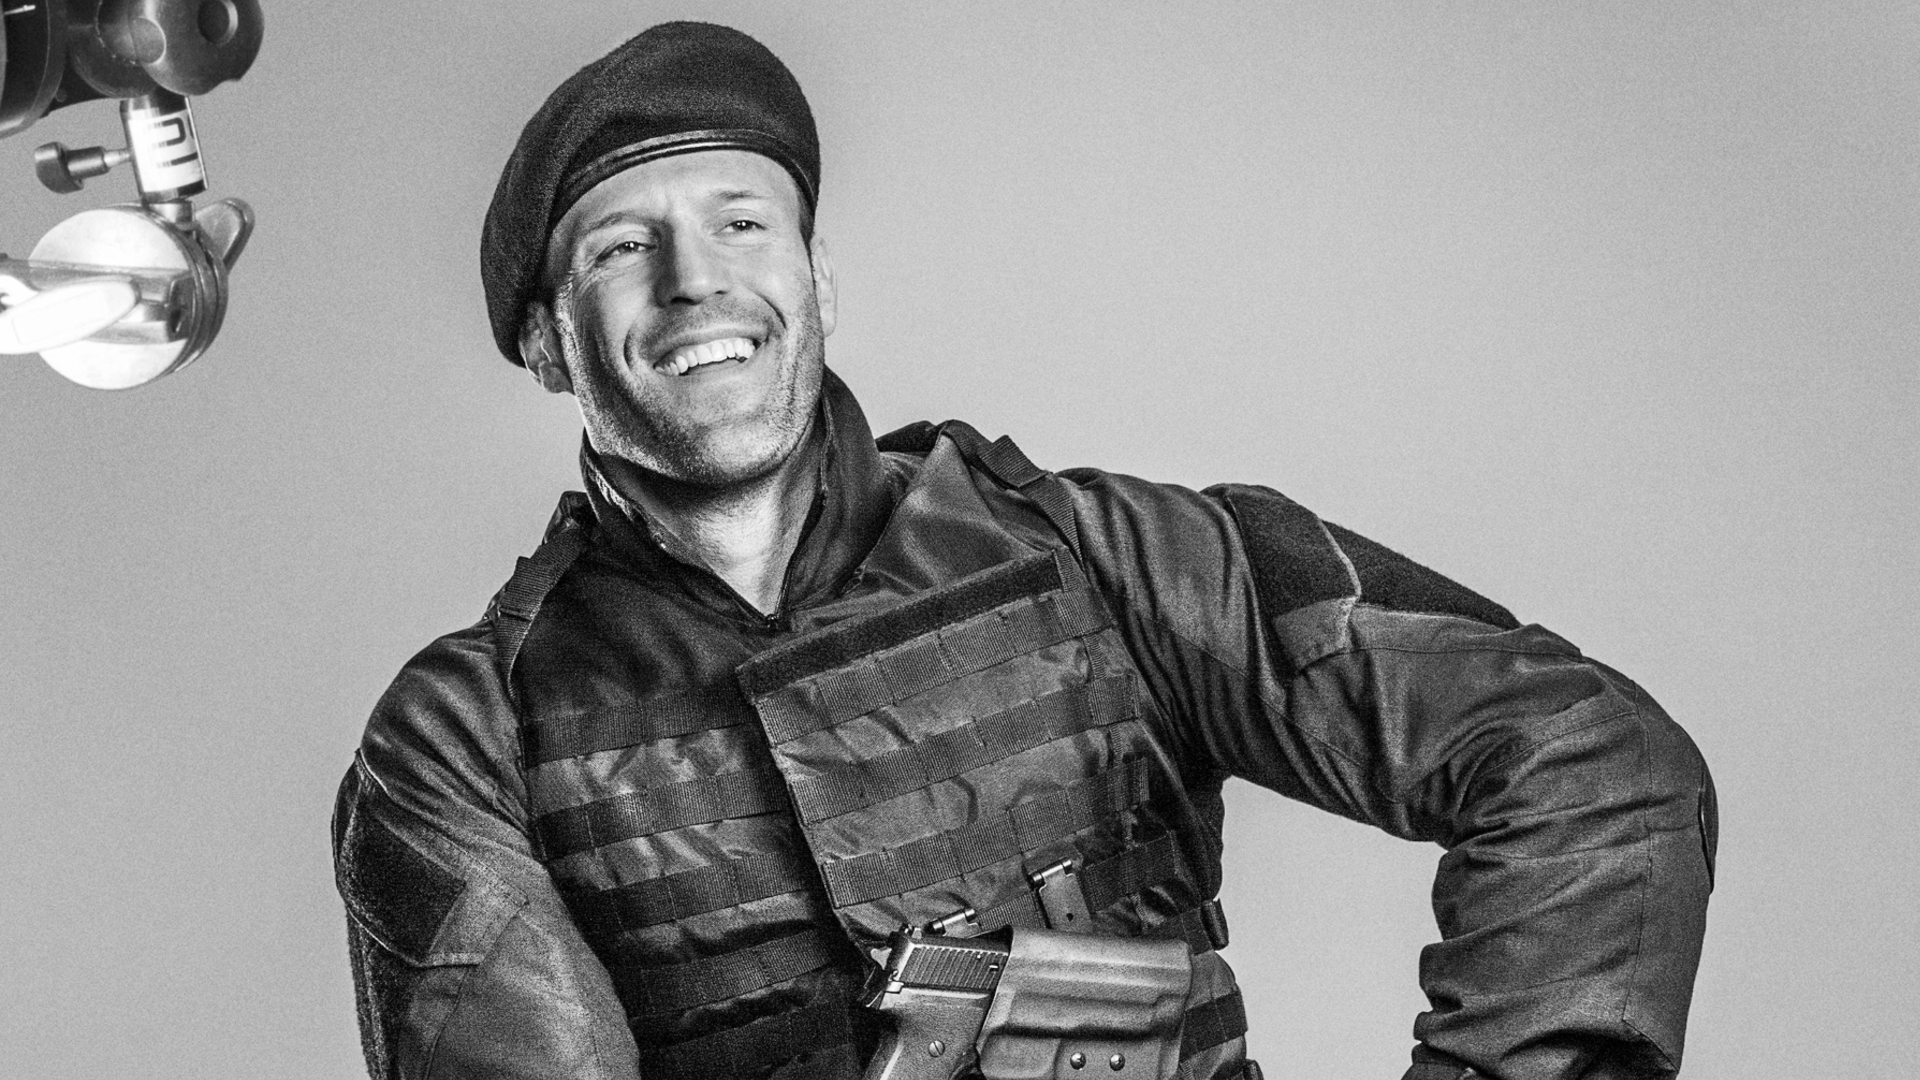 The Expendables: A Christmas Story Spin-Off Will Star Jason Statham